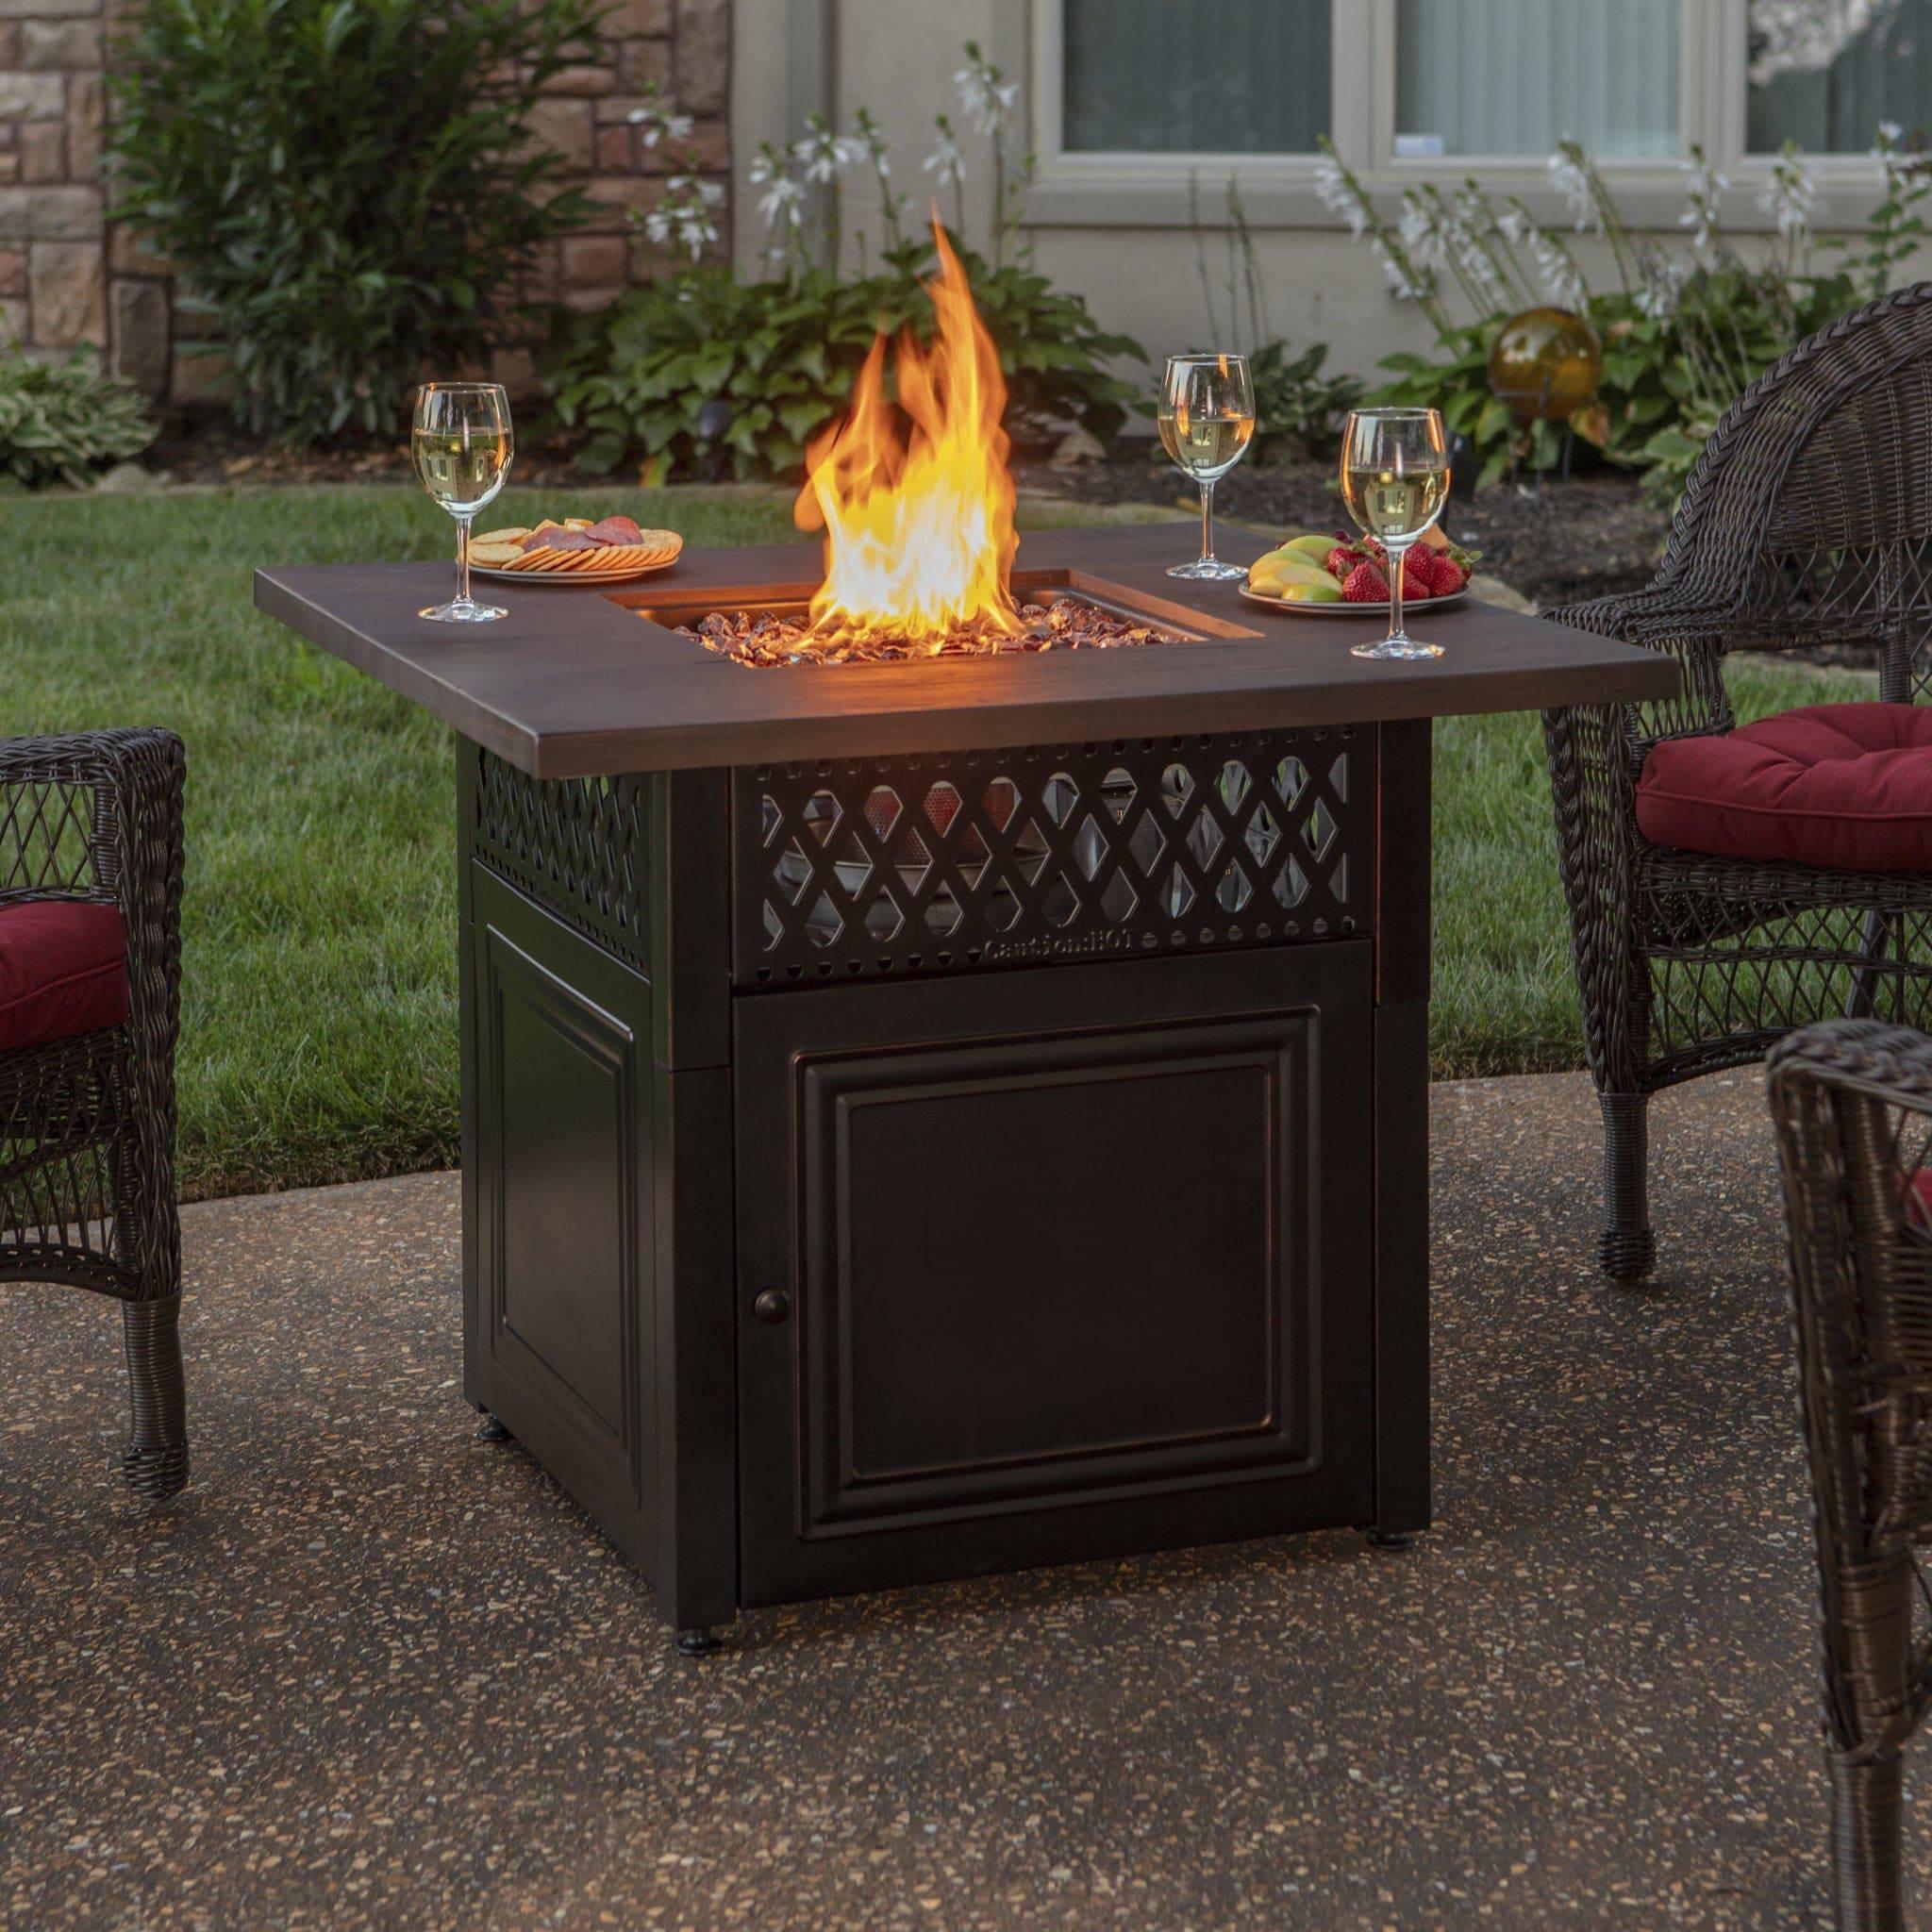 Endless Summer The Donovan, Dual Heat Propane Outdoor Fire Pit Table/Patio Heater with Wood Resin Mantel - Kozy Korner Fire Pits